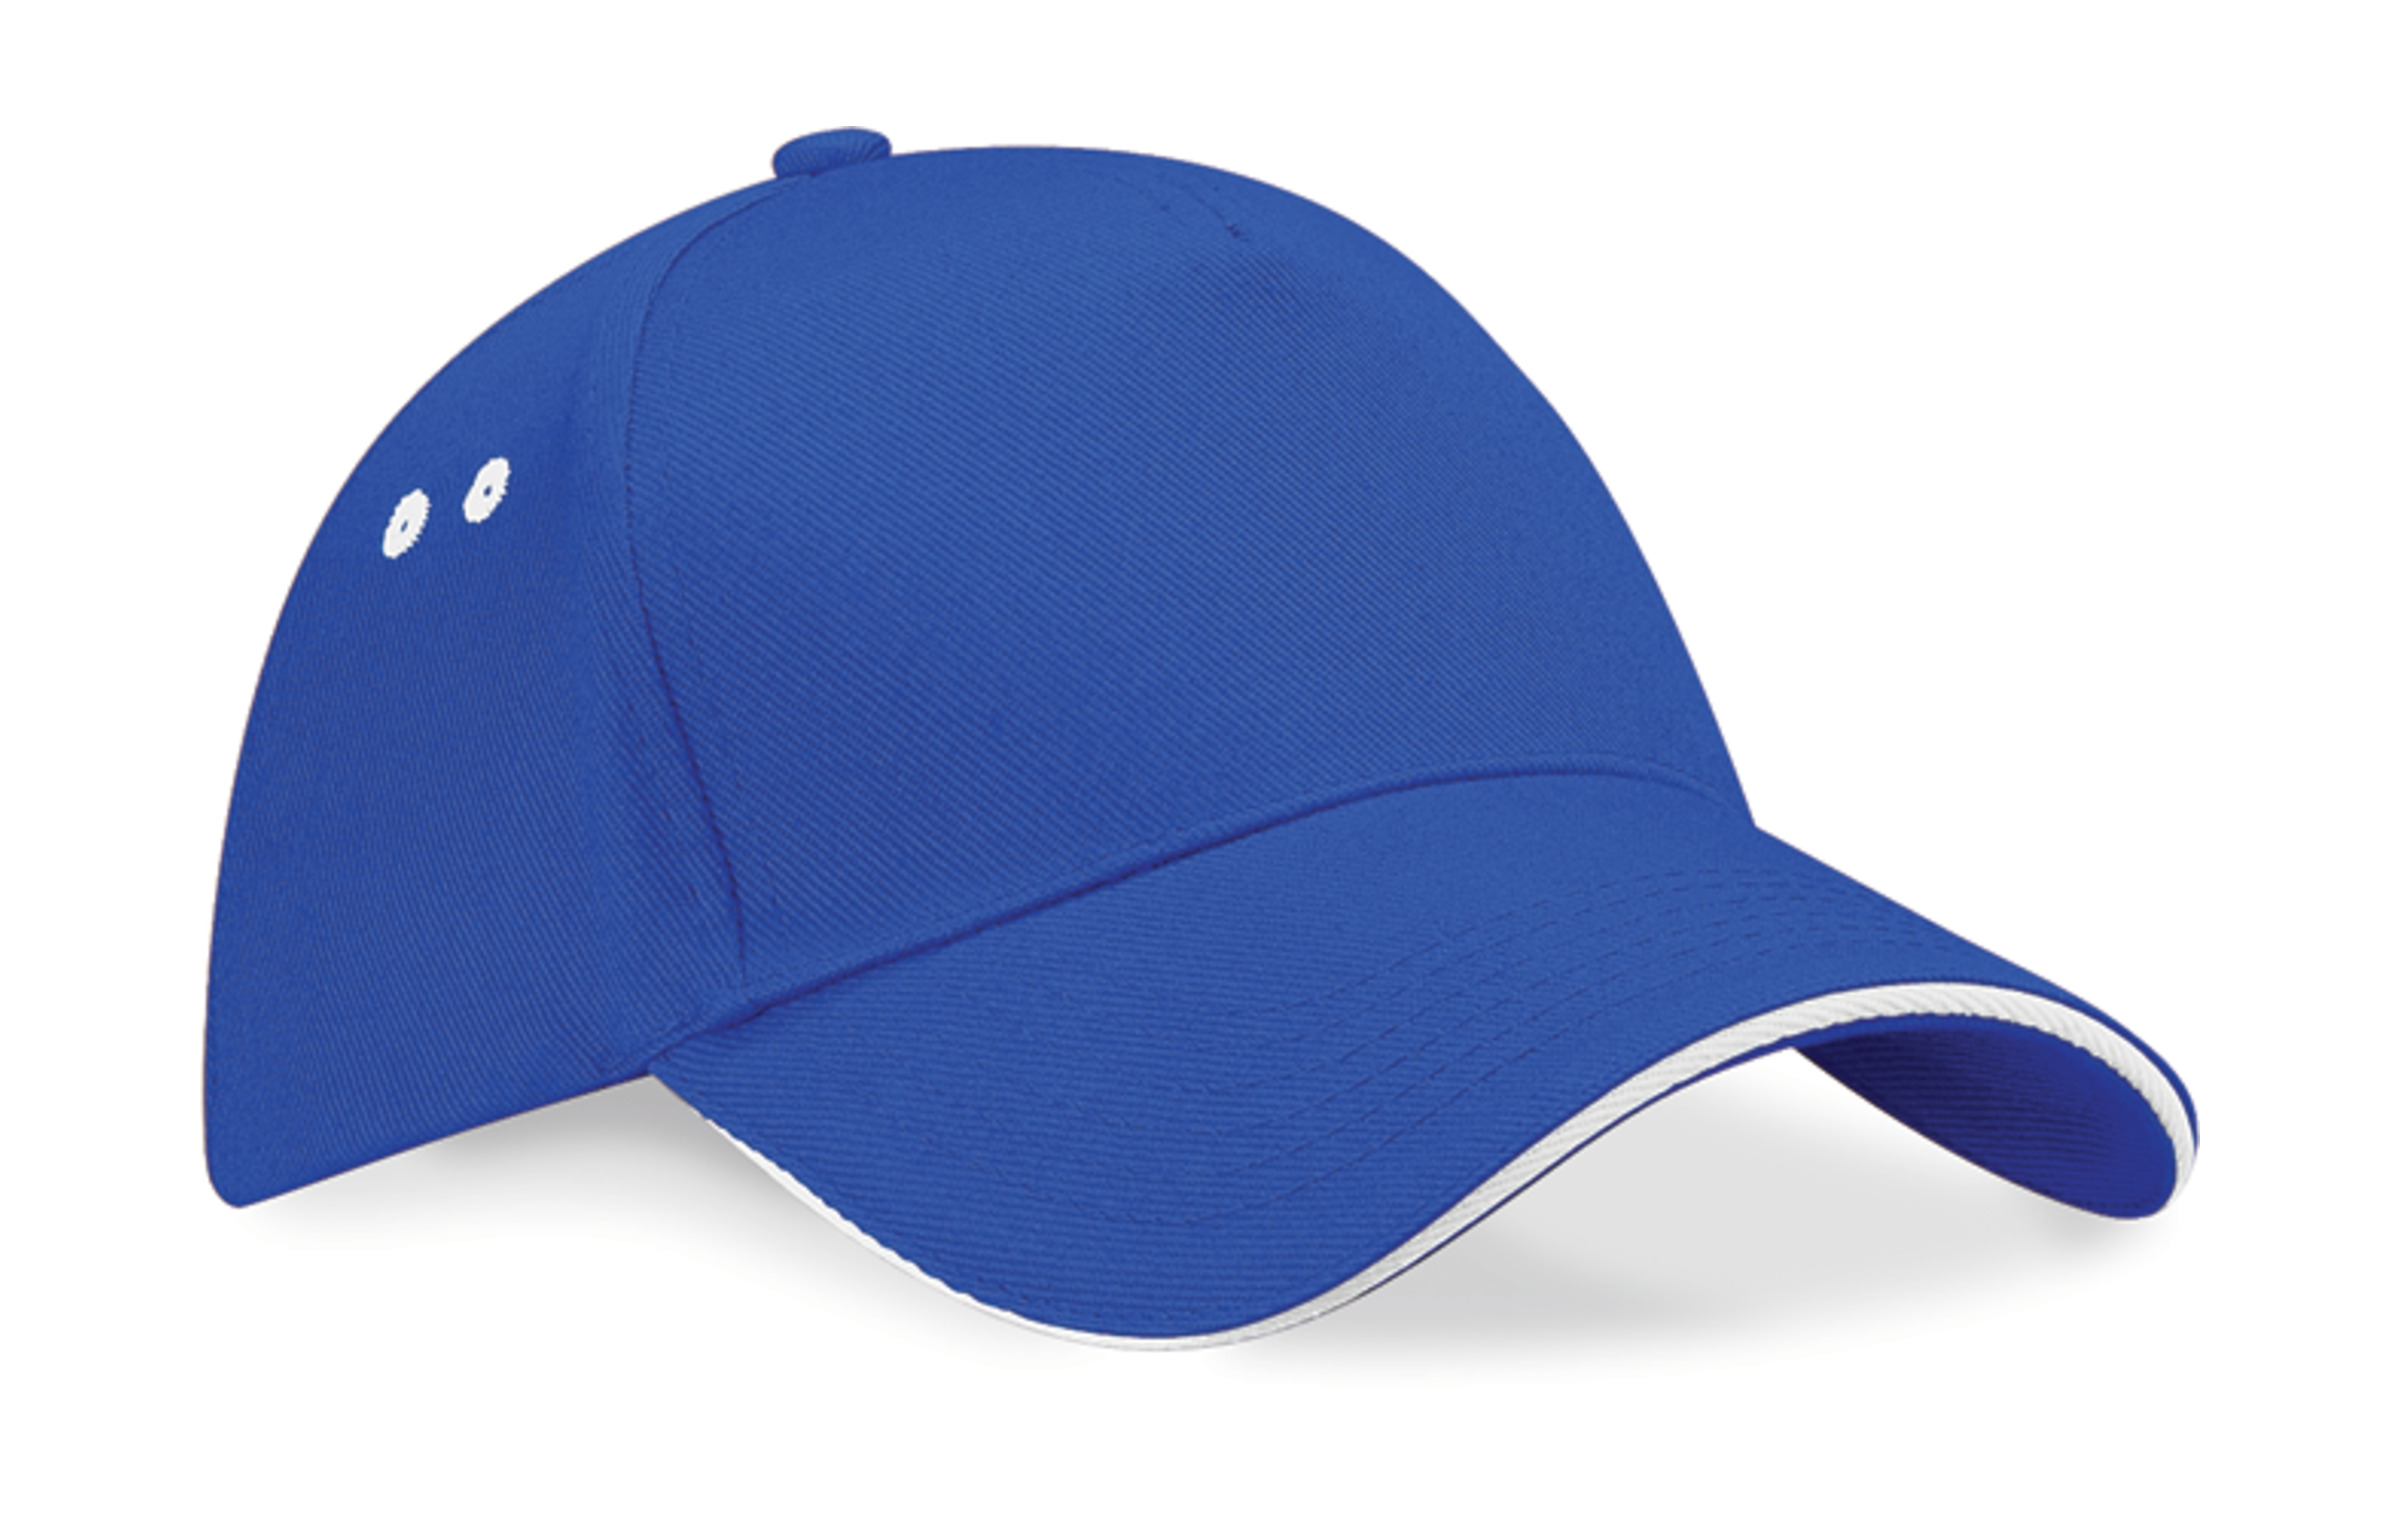 Beechfield Ultimate 5 Panel Cap - Bright Royal/White - One Size